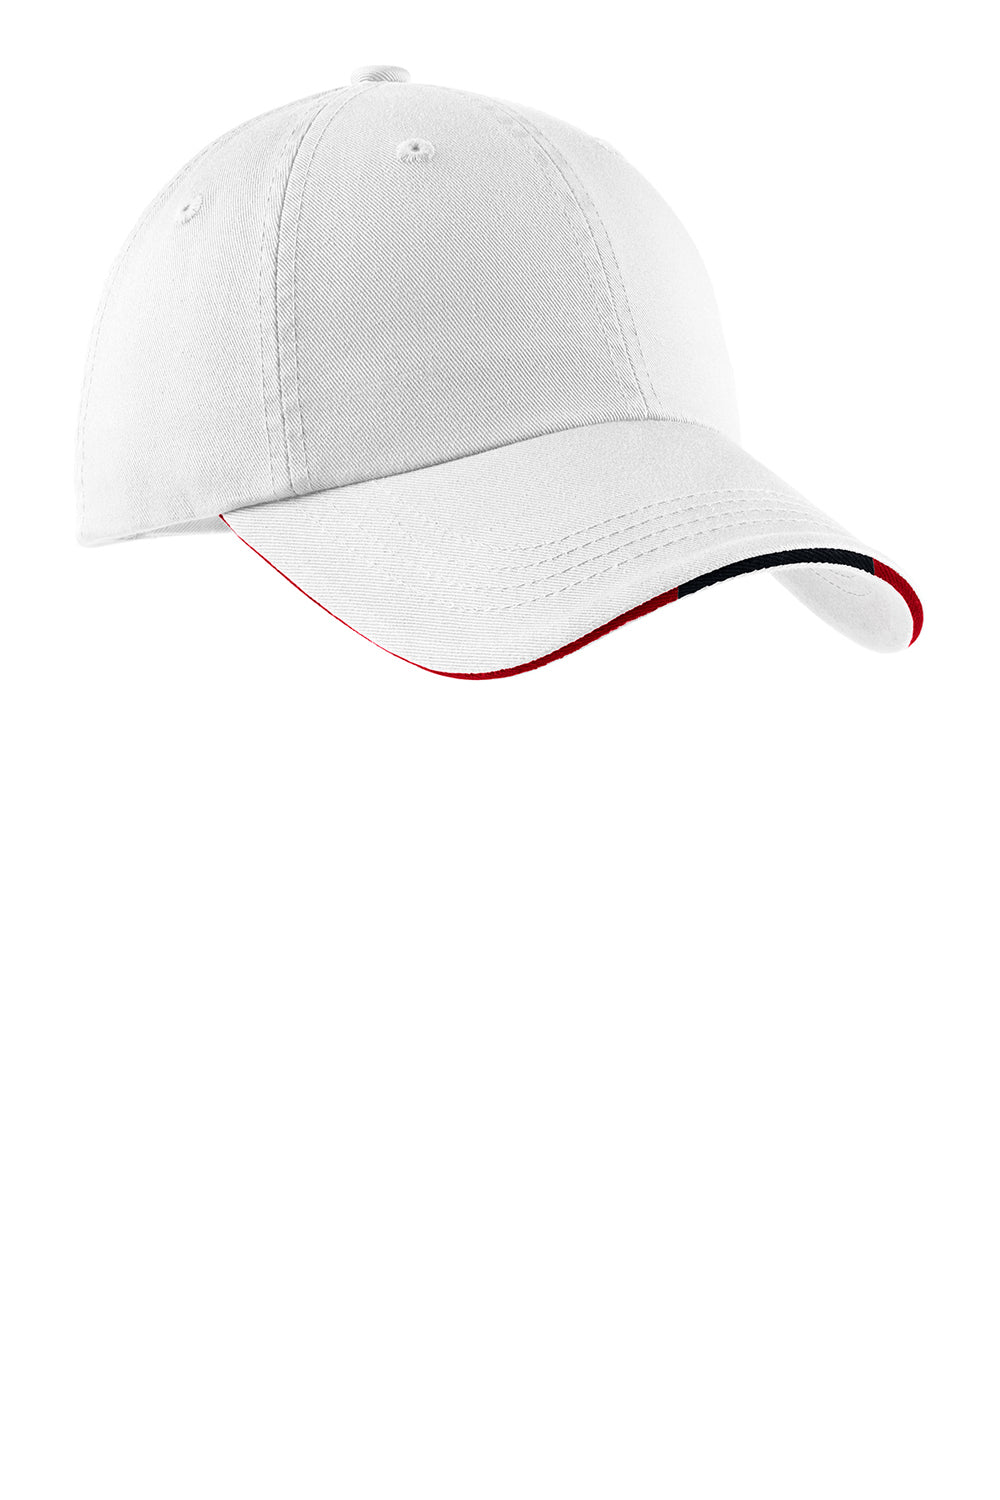 Port Authority C830 Mens Adjustable Hat White/Navy Blue/Red Front